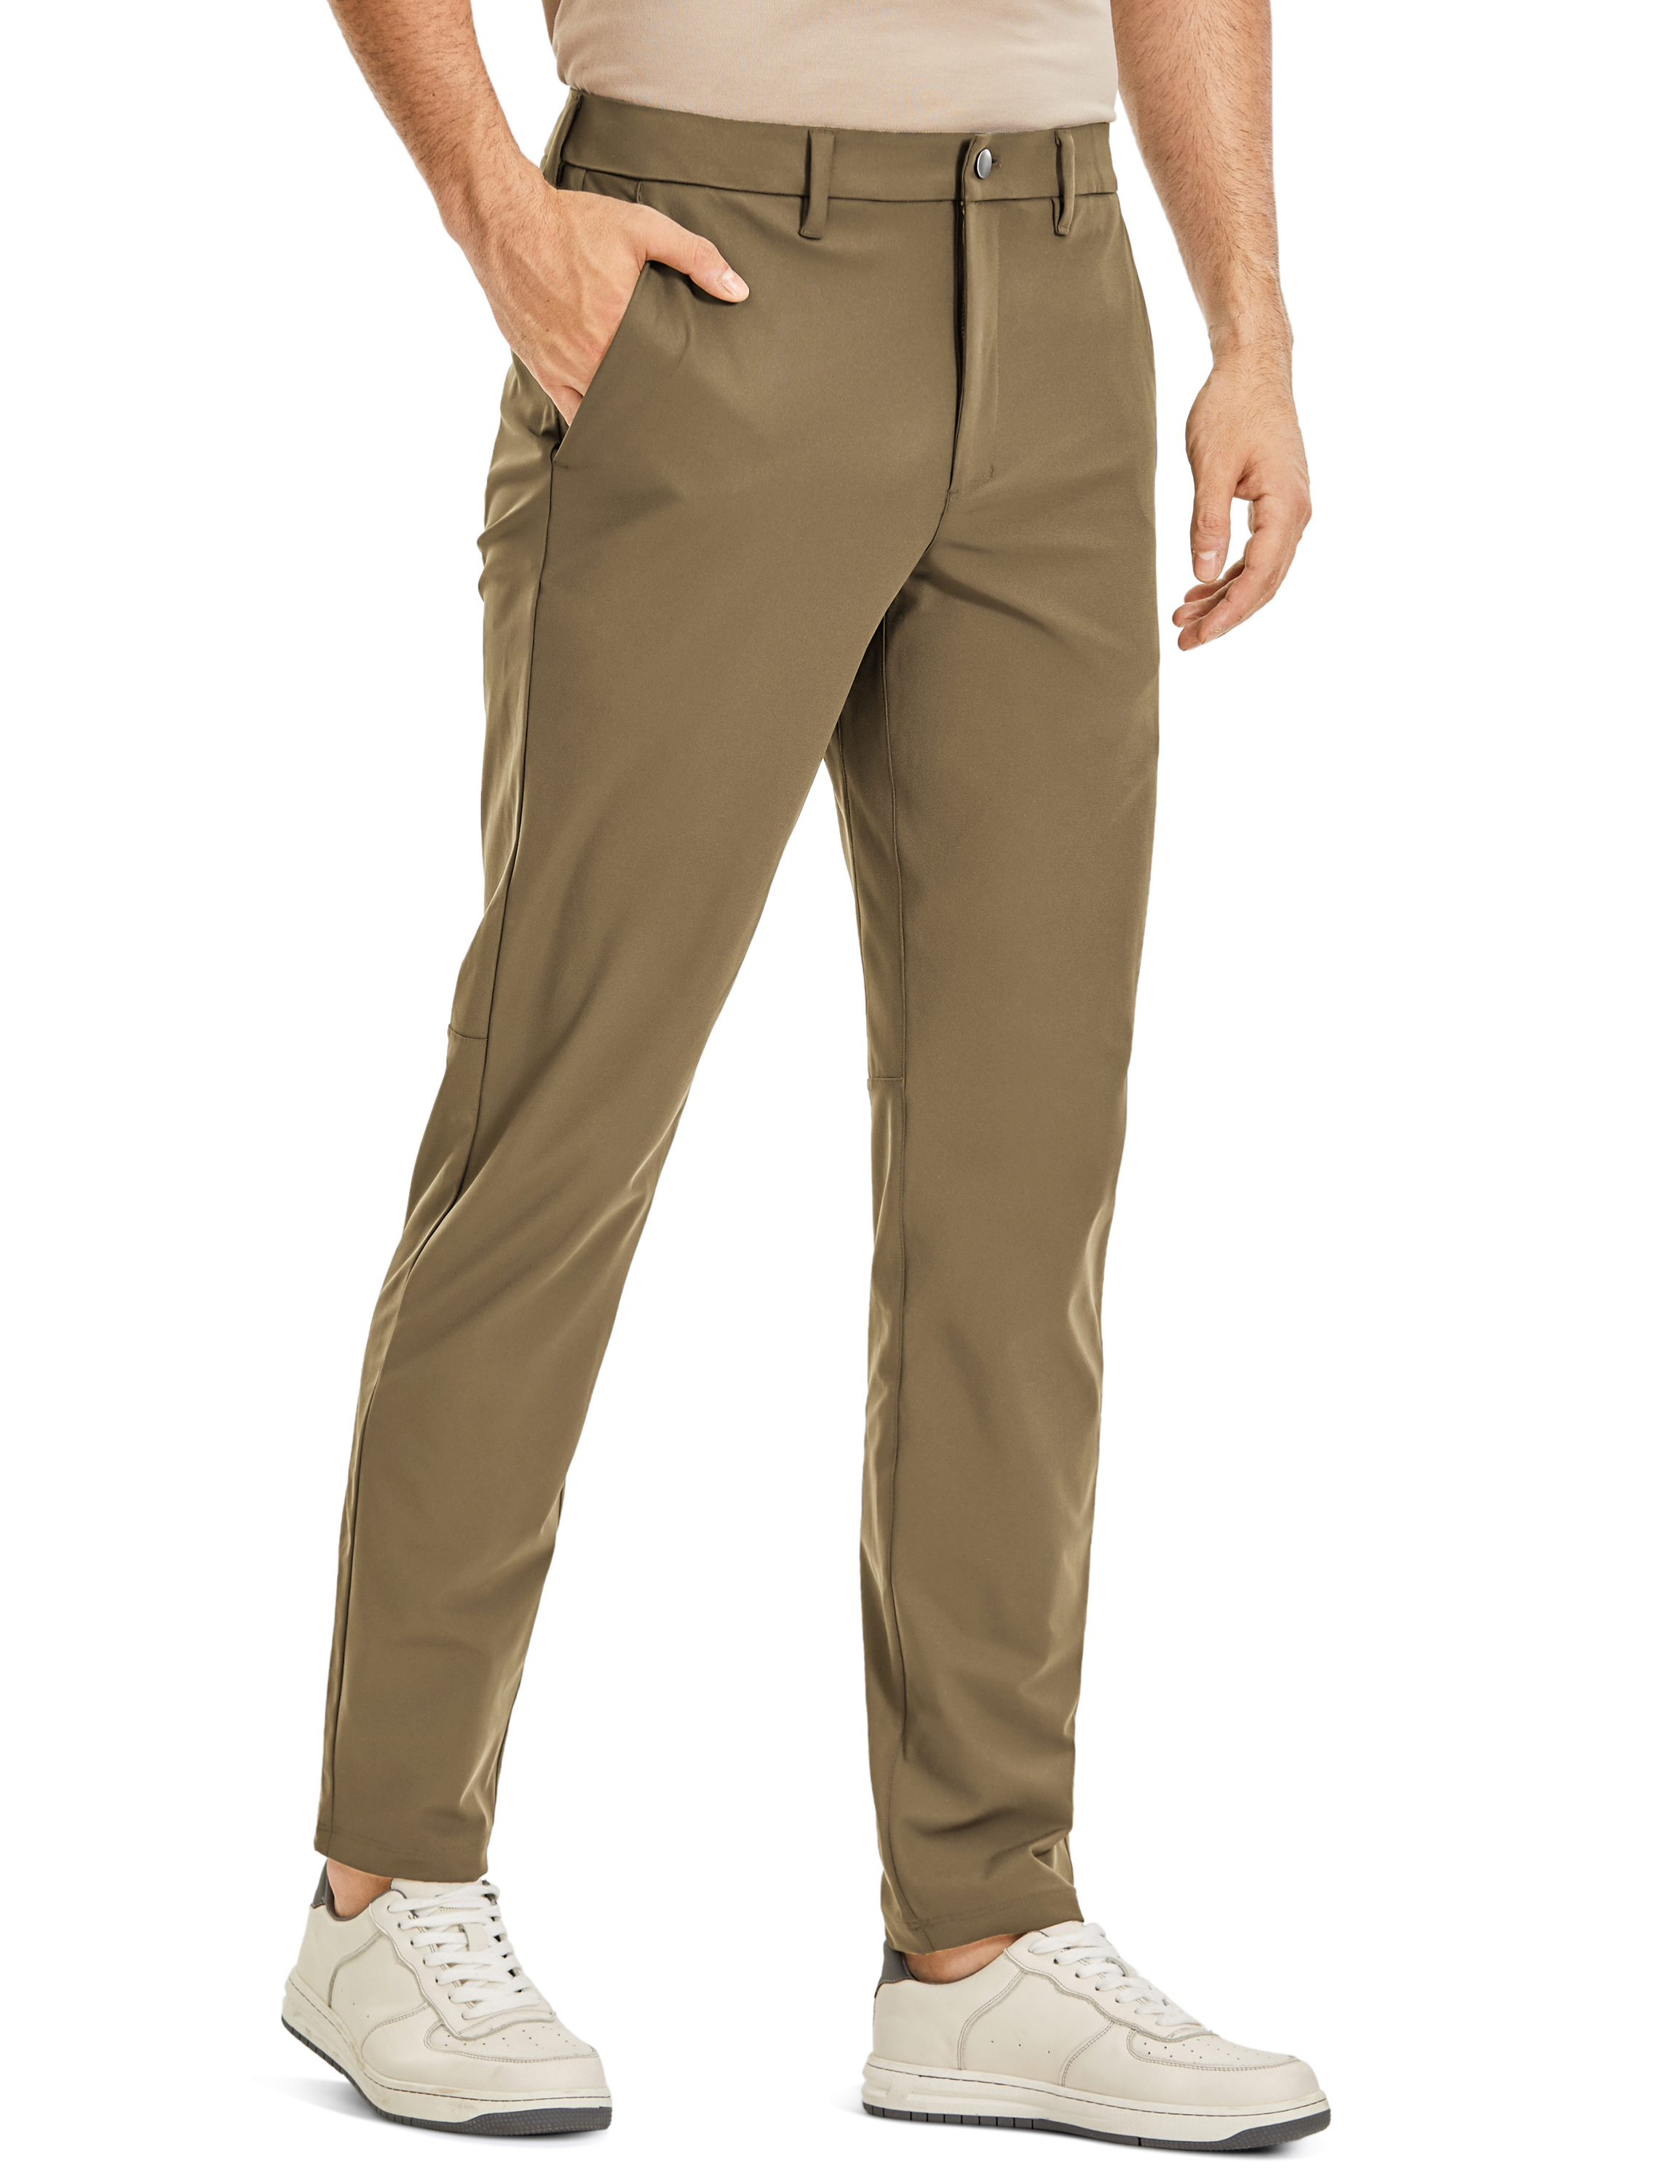 CRZ YOGA Mens Work Classic Fit All-Day Comfort Golf Pants Pockets 34